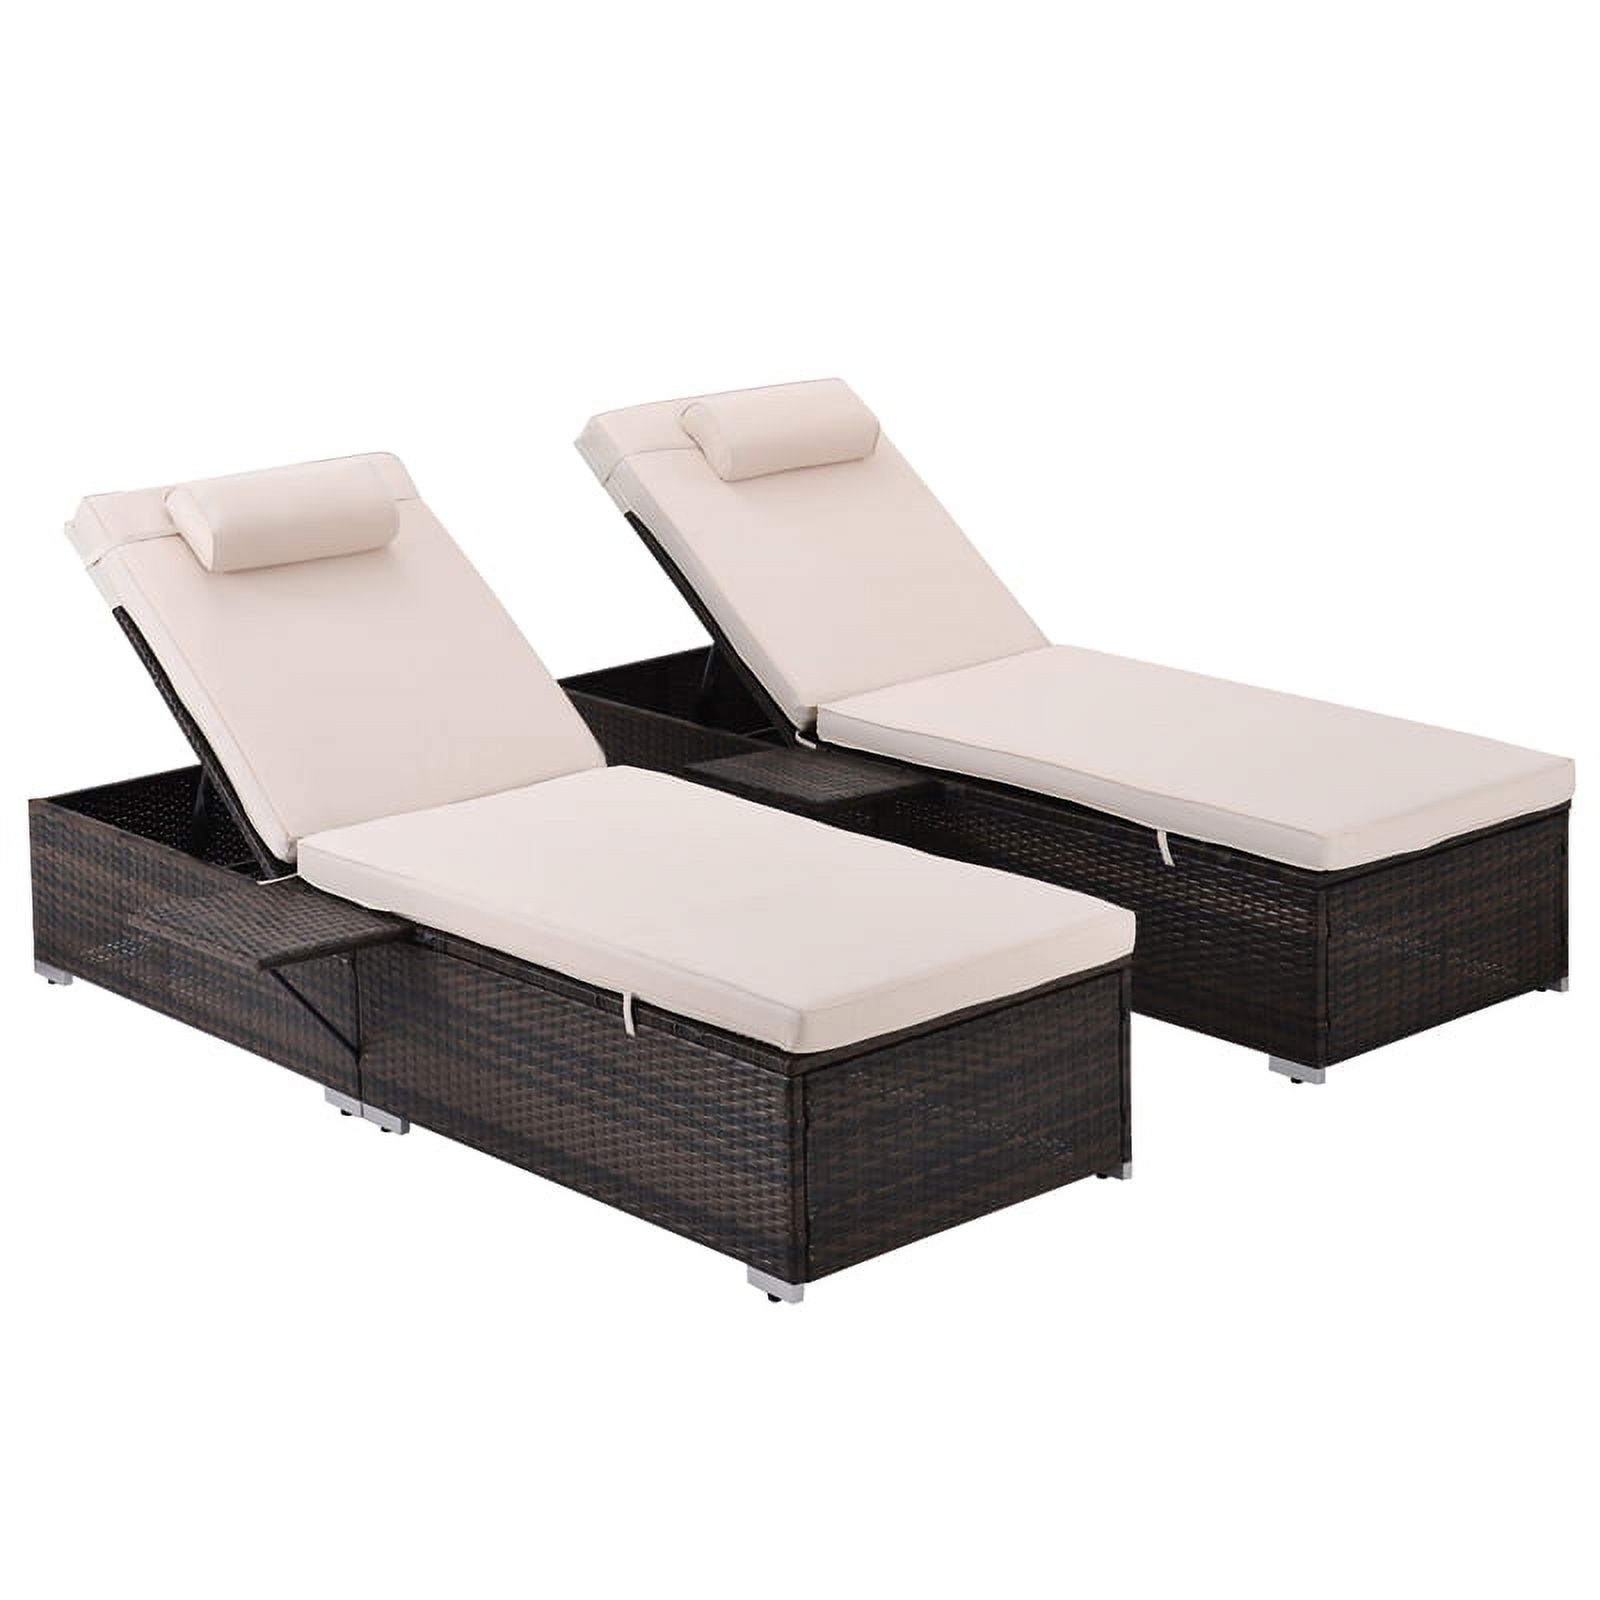 CRO Decor Outdoor PE Wicker Chaise Lounge 2pc with Side Table and Head Pillow - image 2 of 14